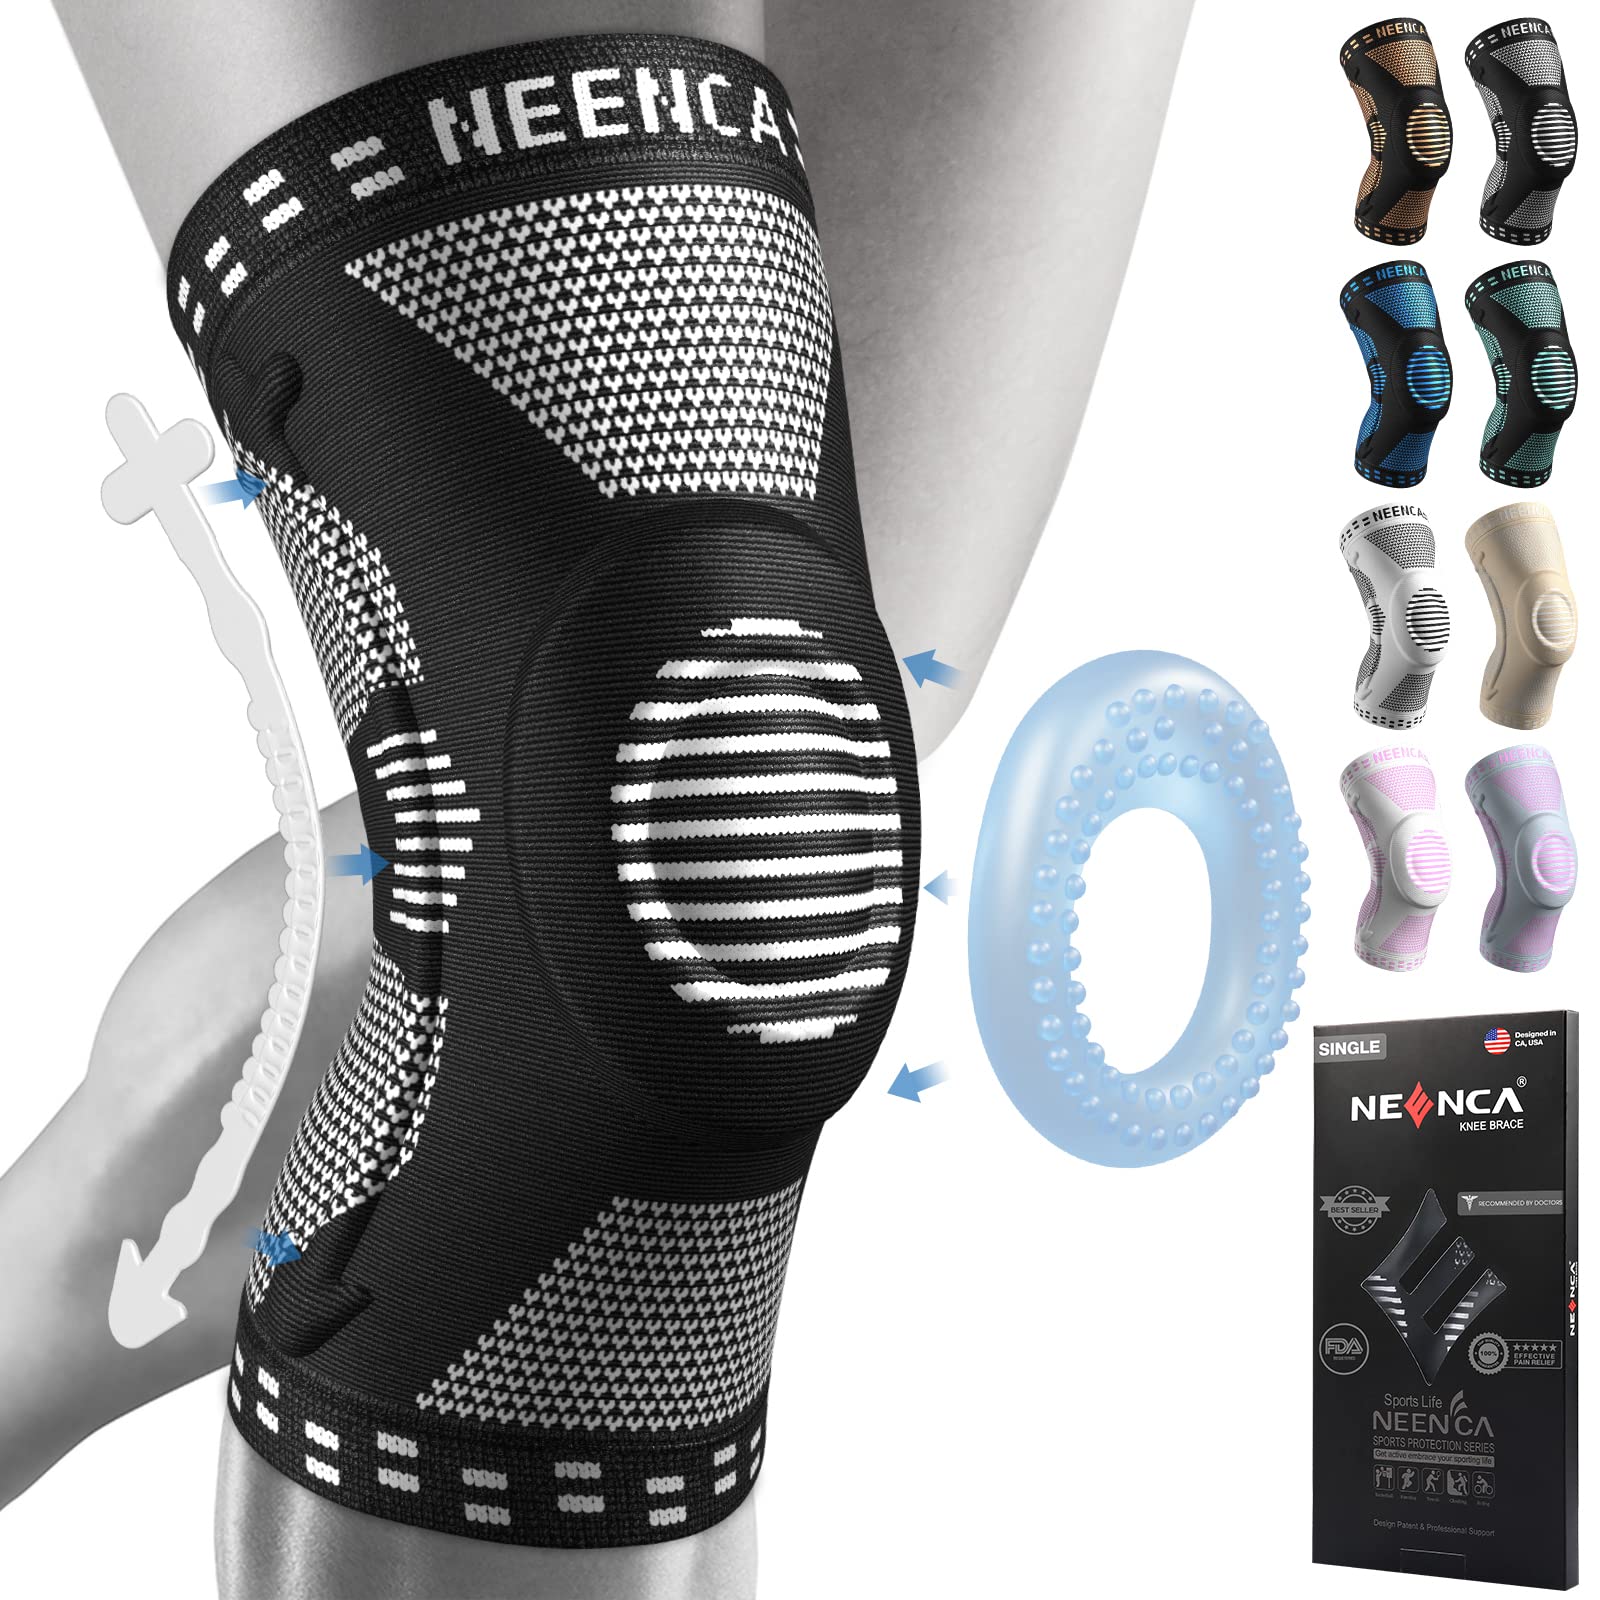 NEENCA Professional Knee Brace for Knee Pain Relief, Medical Knee Support with Patella Pad & Side Stabilizers, Compression Knee Sleeve for Meniscus Tear, ACL, Arthritis, Joint Pain, Runner, Workout...